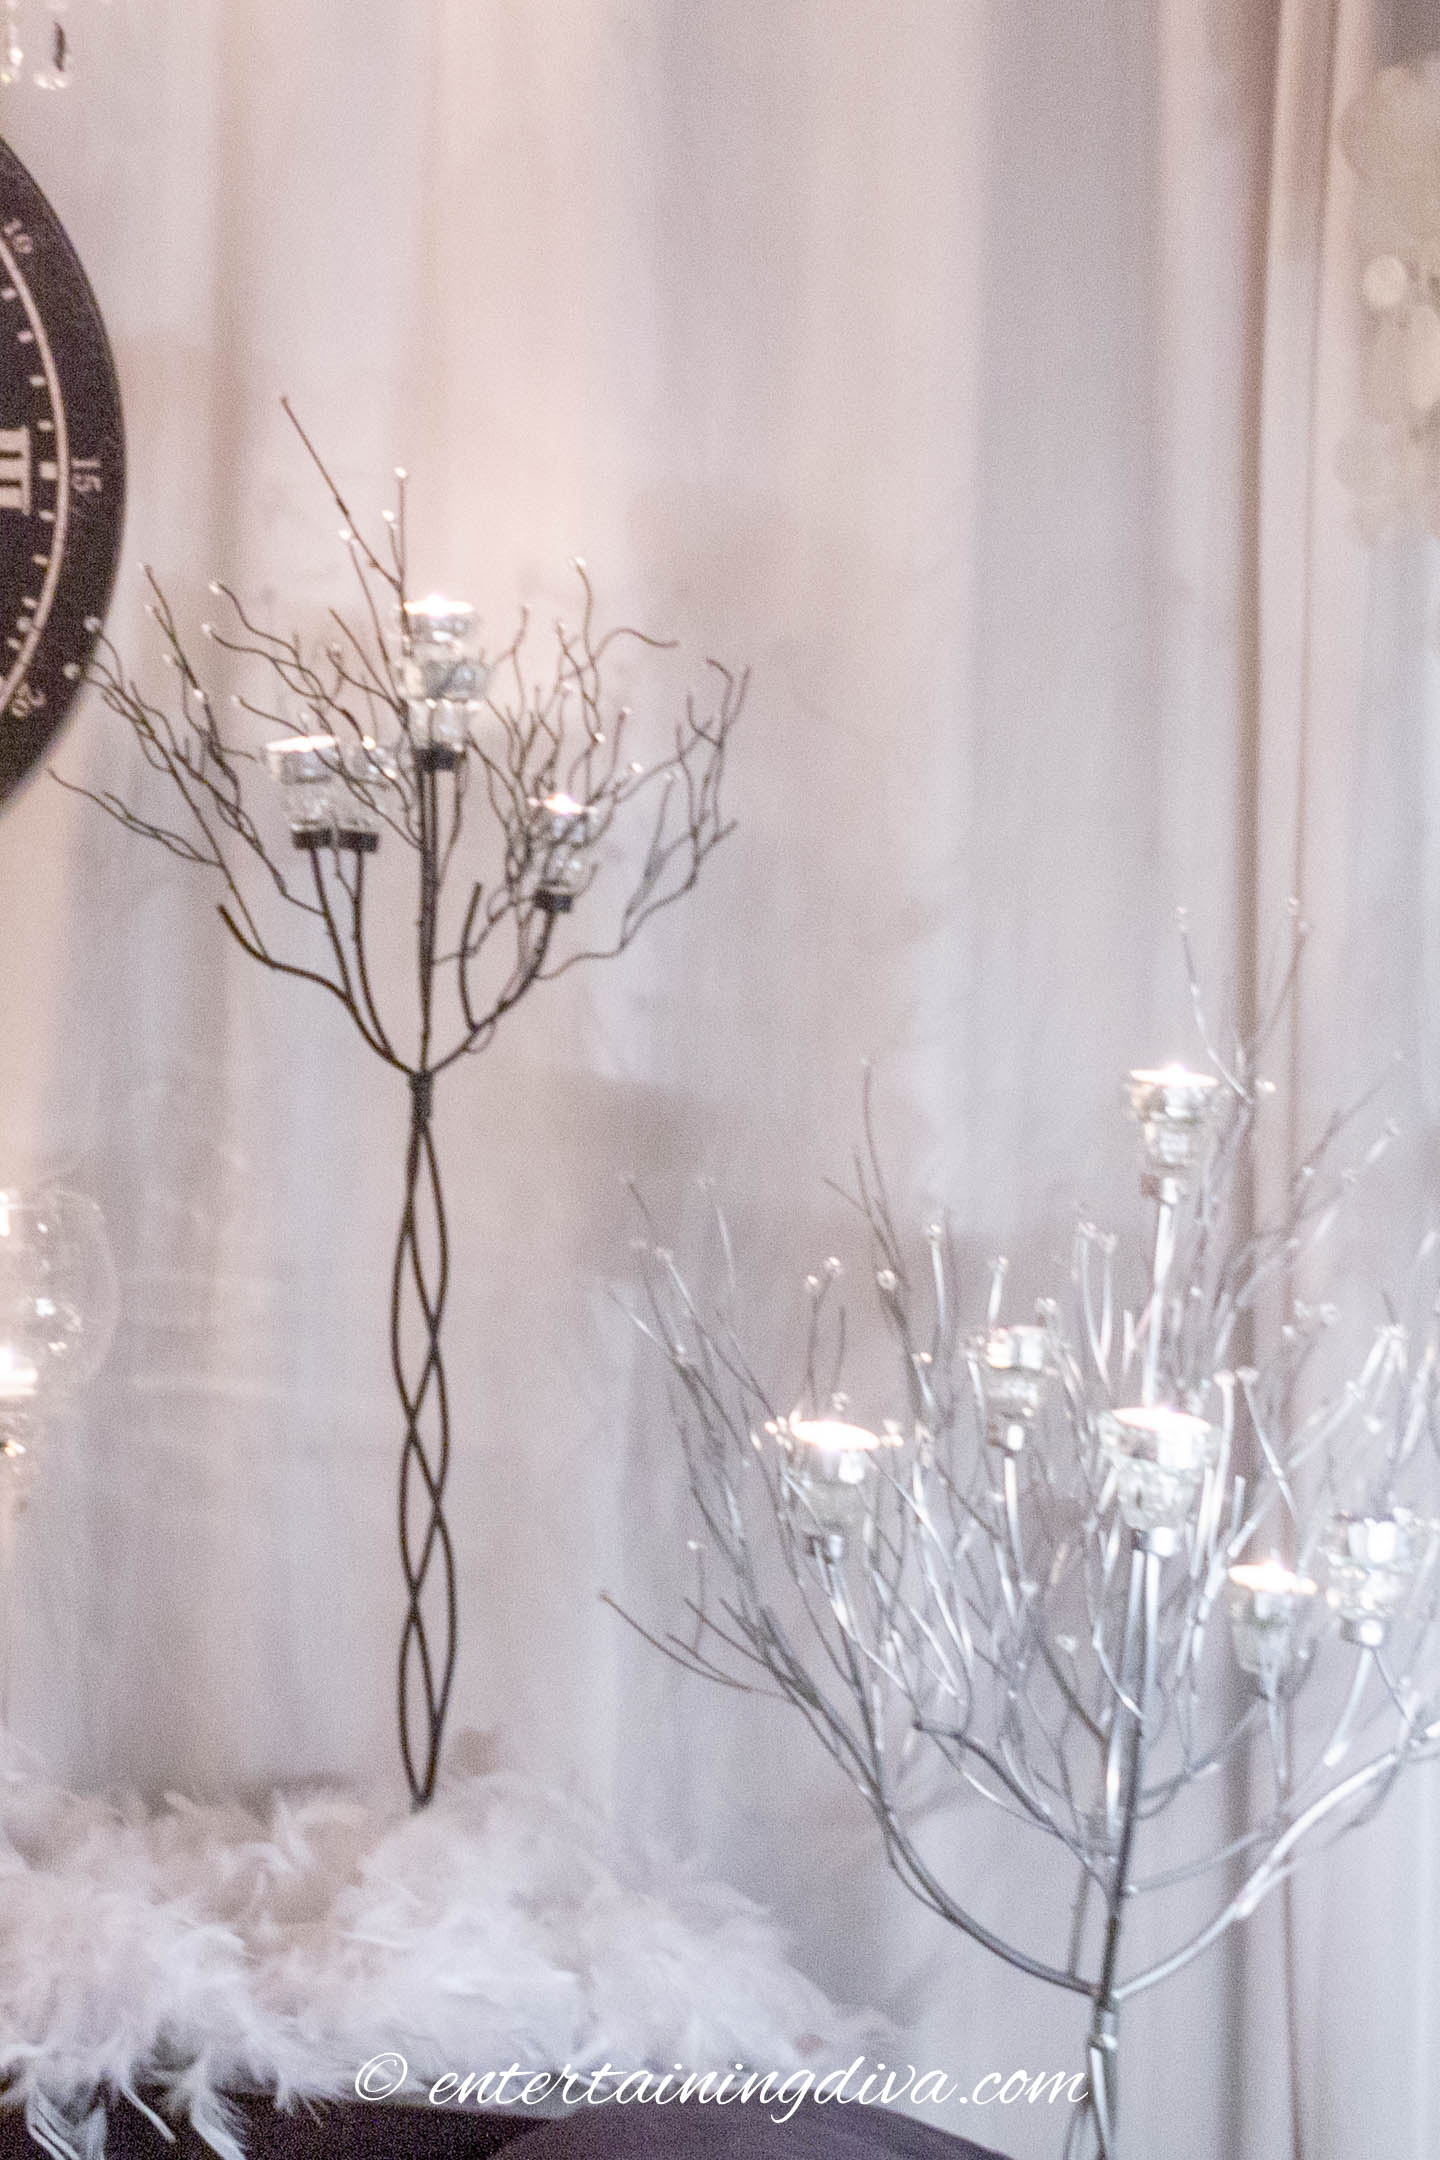 Winter wonderland party decor with candle trees in front of white curtains